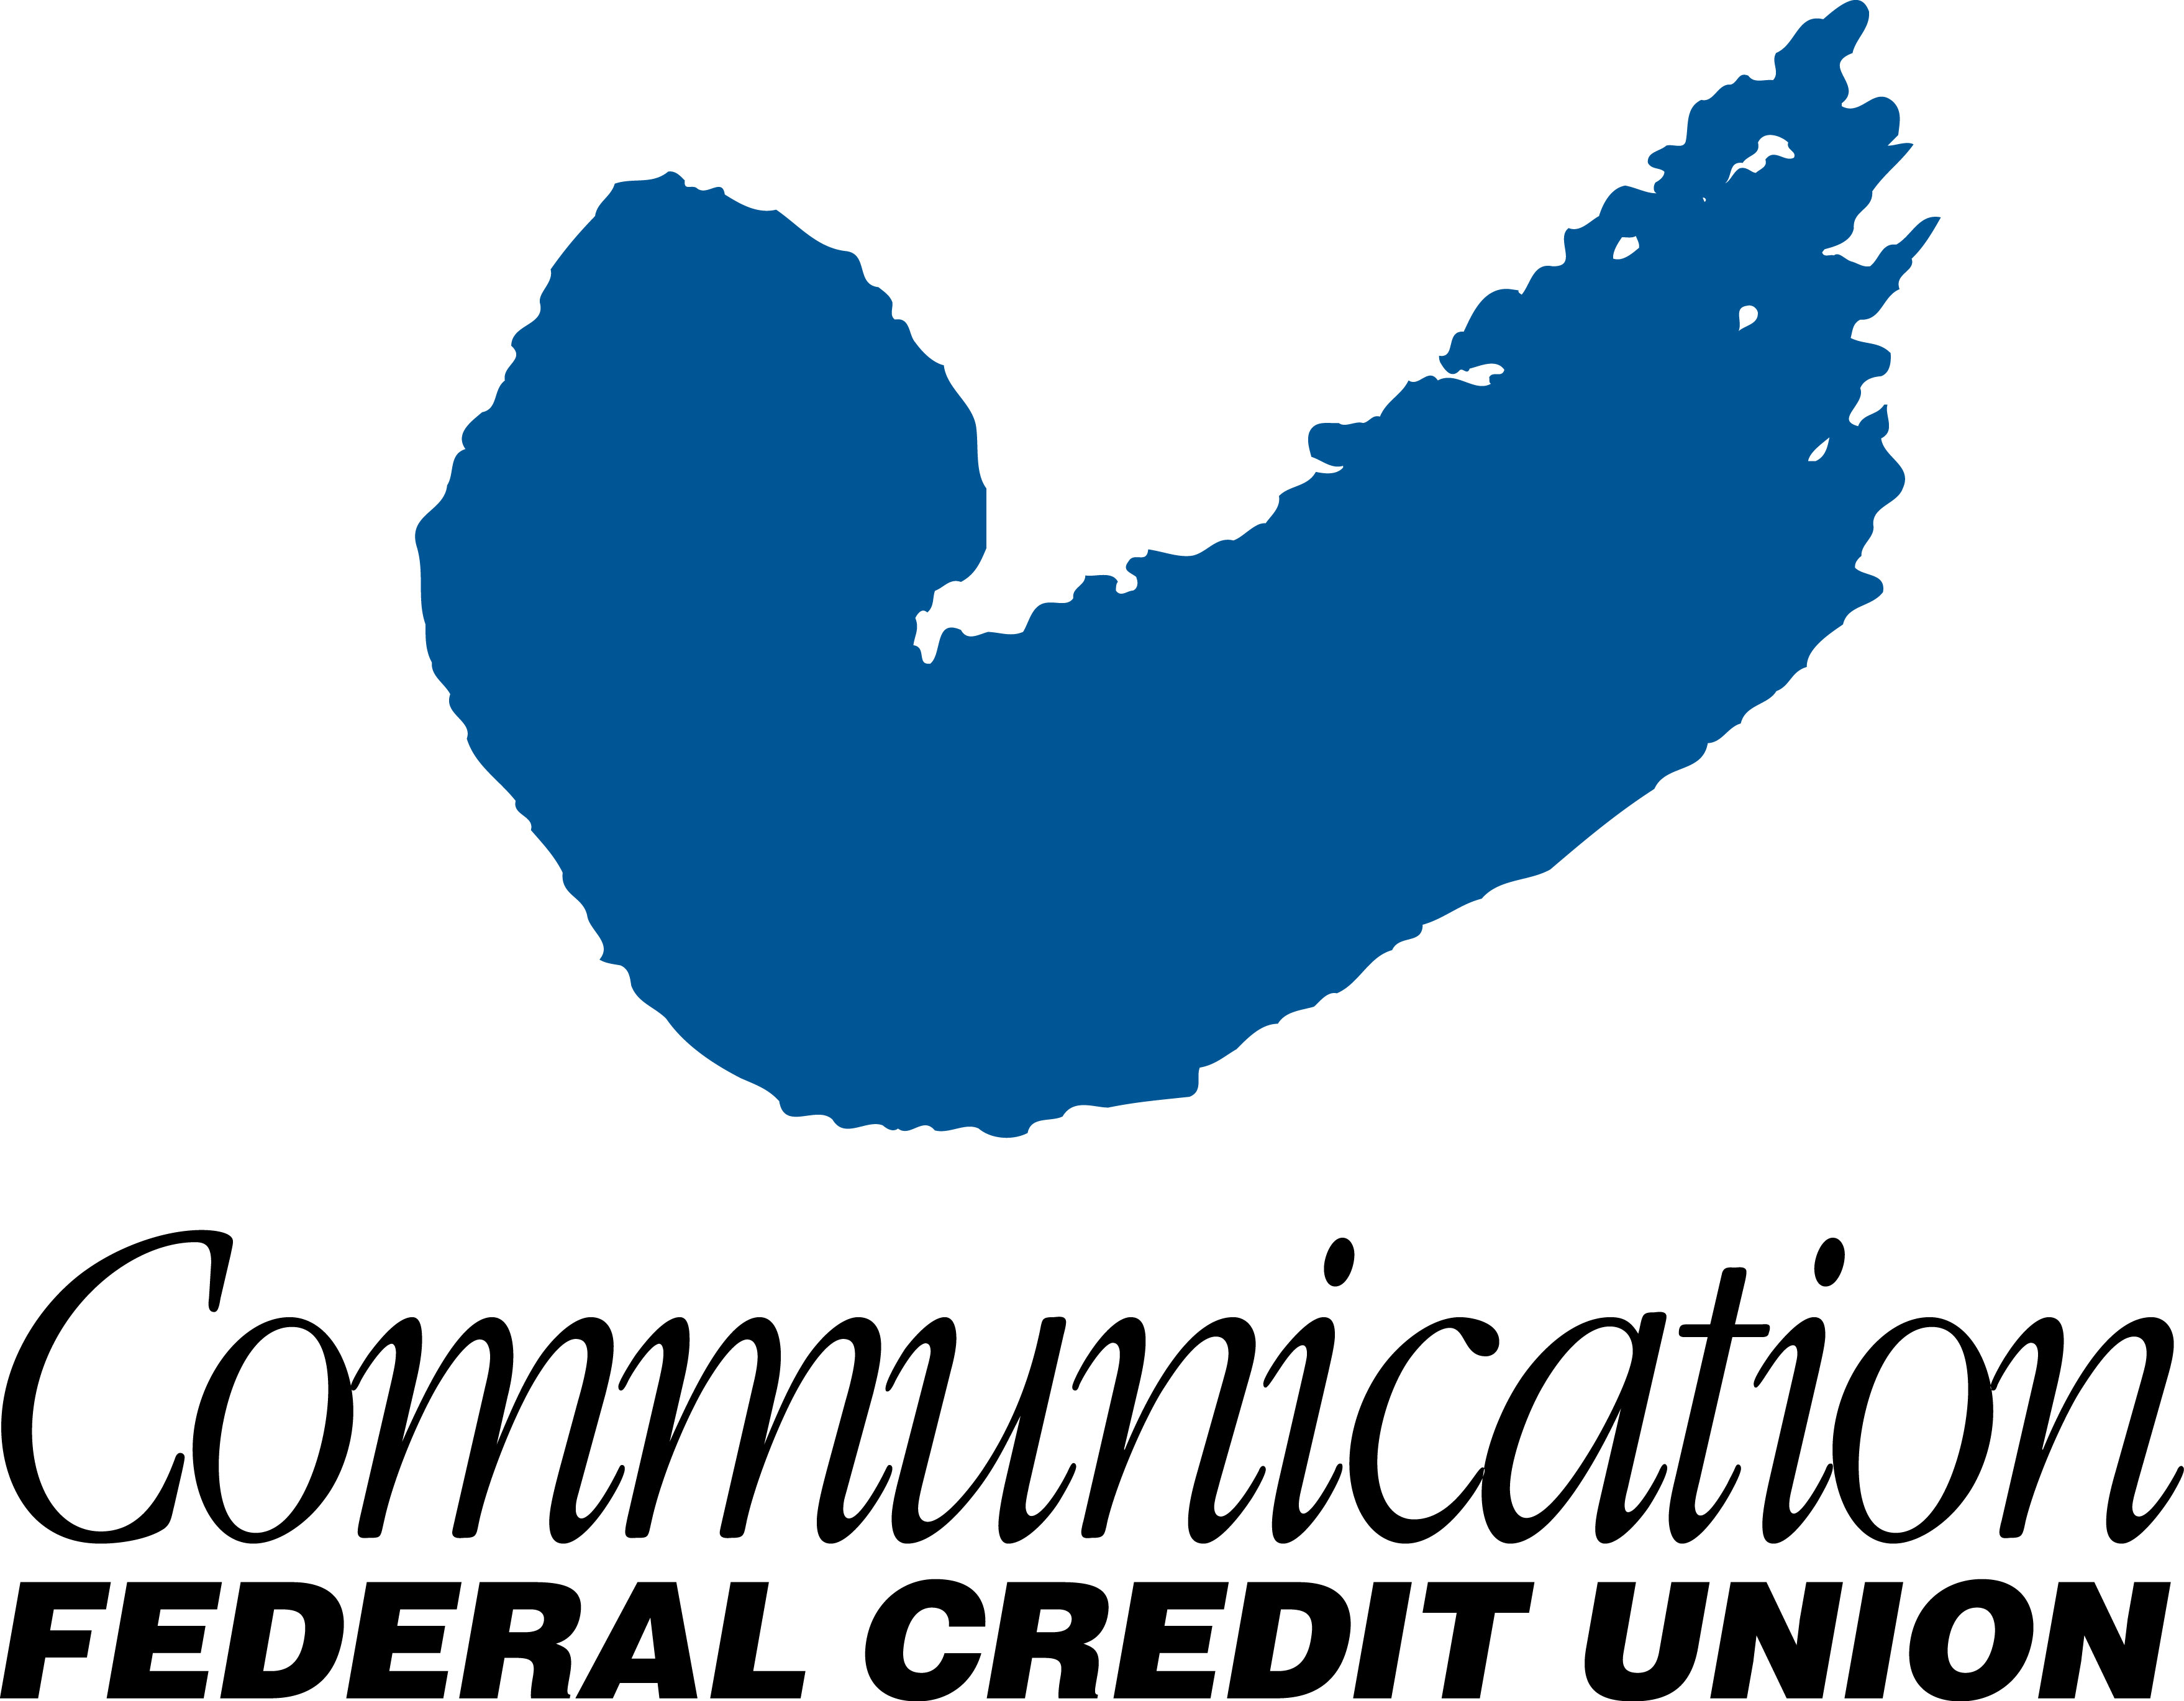 Communications Federal Credit Union